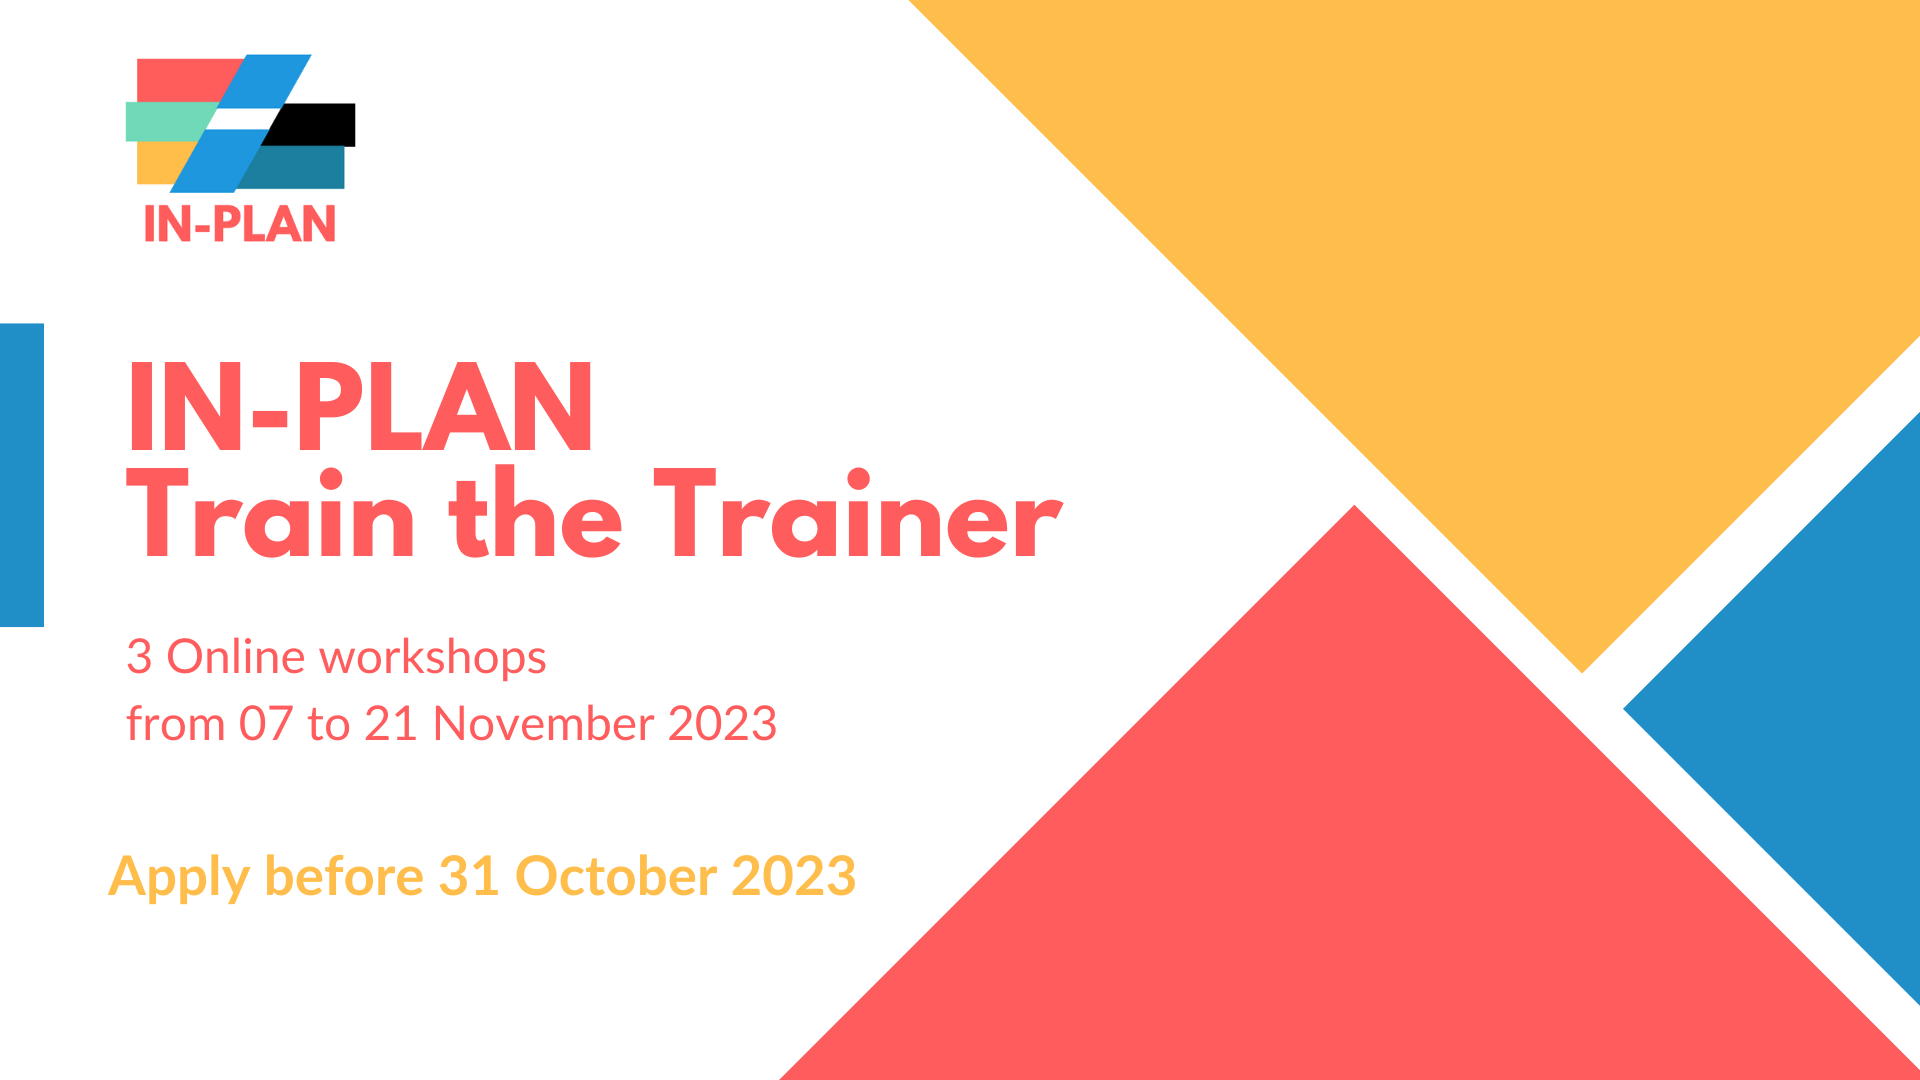 IN-PLAN Train the Trainer1